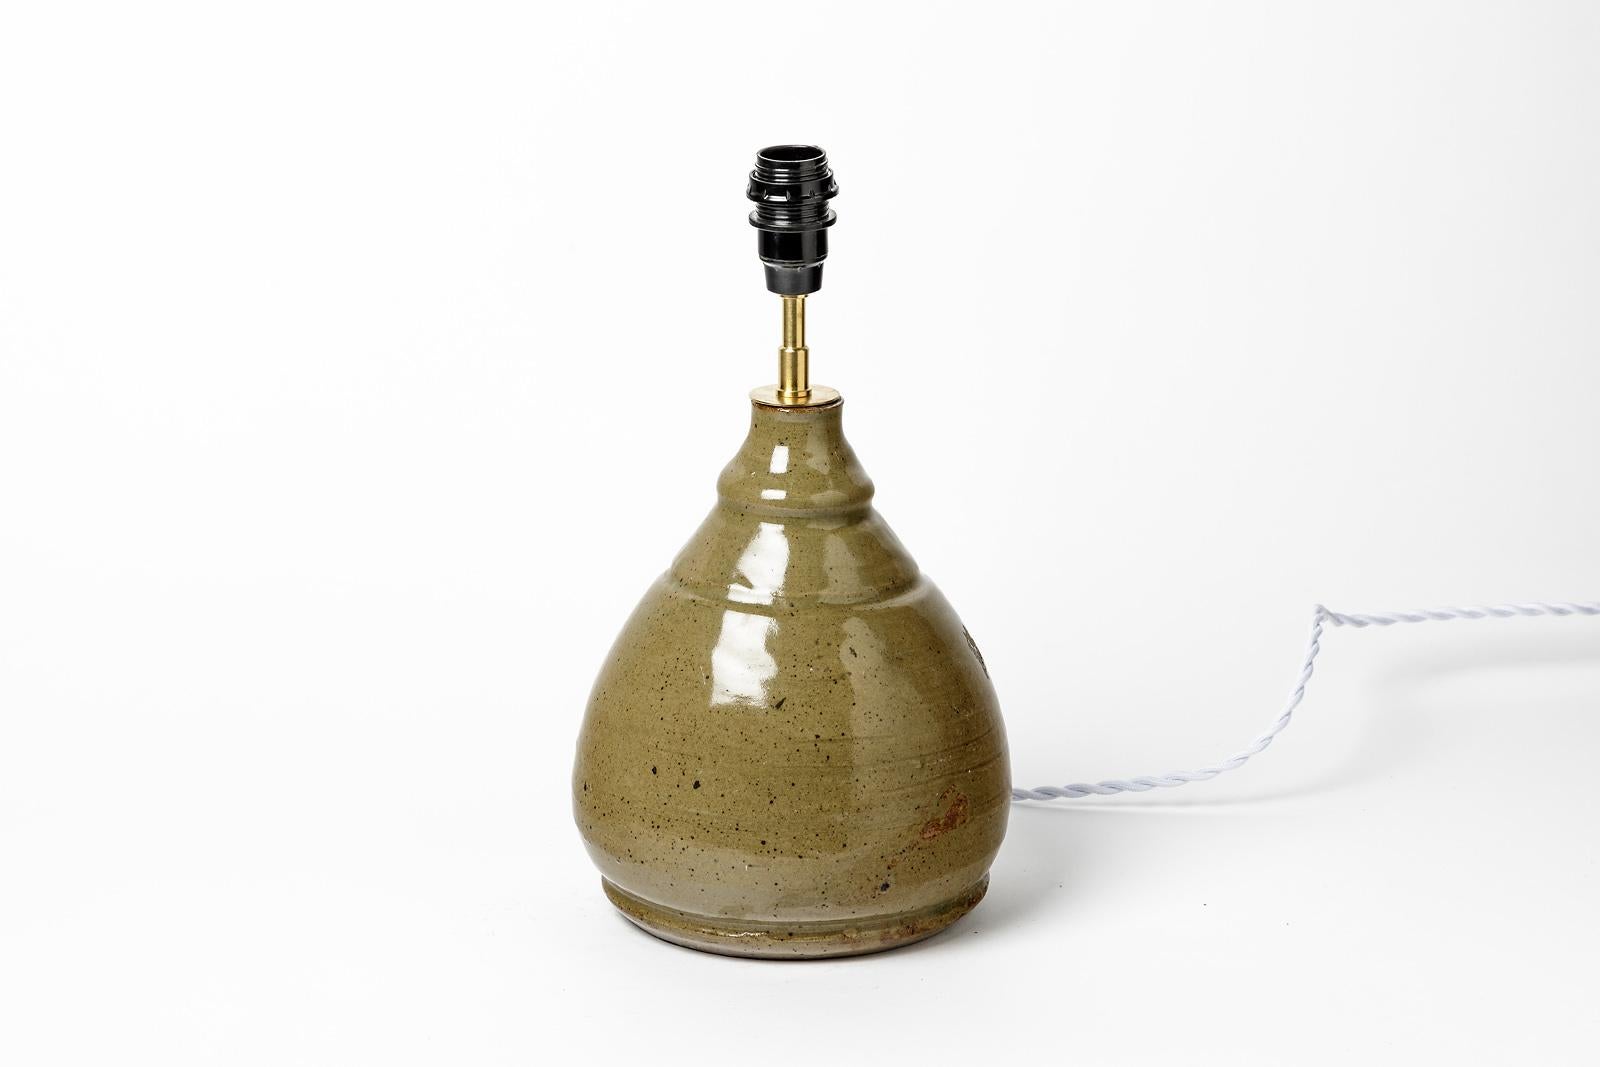 La Borne potters

Signed at the base

Original stoneware ceramic table lamp

Realised circa 1970

Electrical system is new

Ceramic measures - height : 22 cm Large : 17 cm
Measures with electrical system - height : 32 cm.